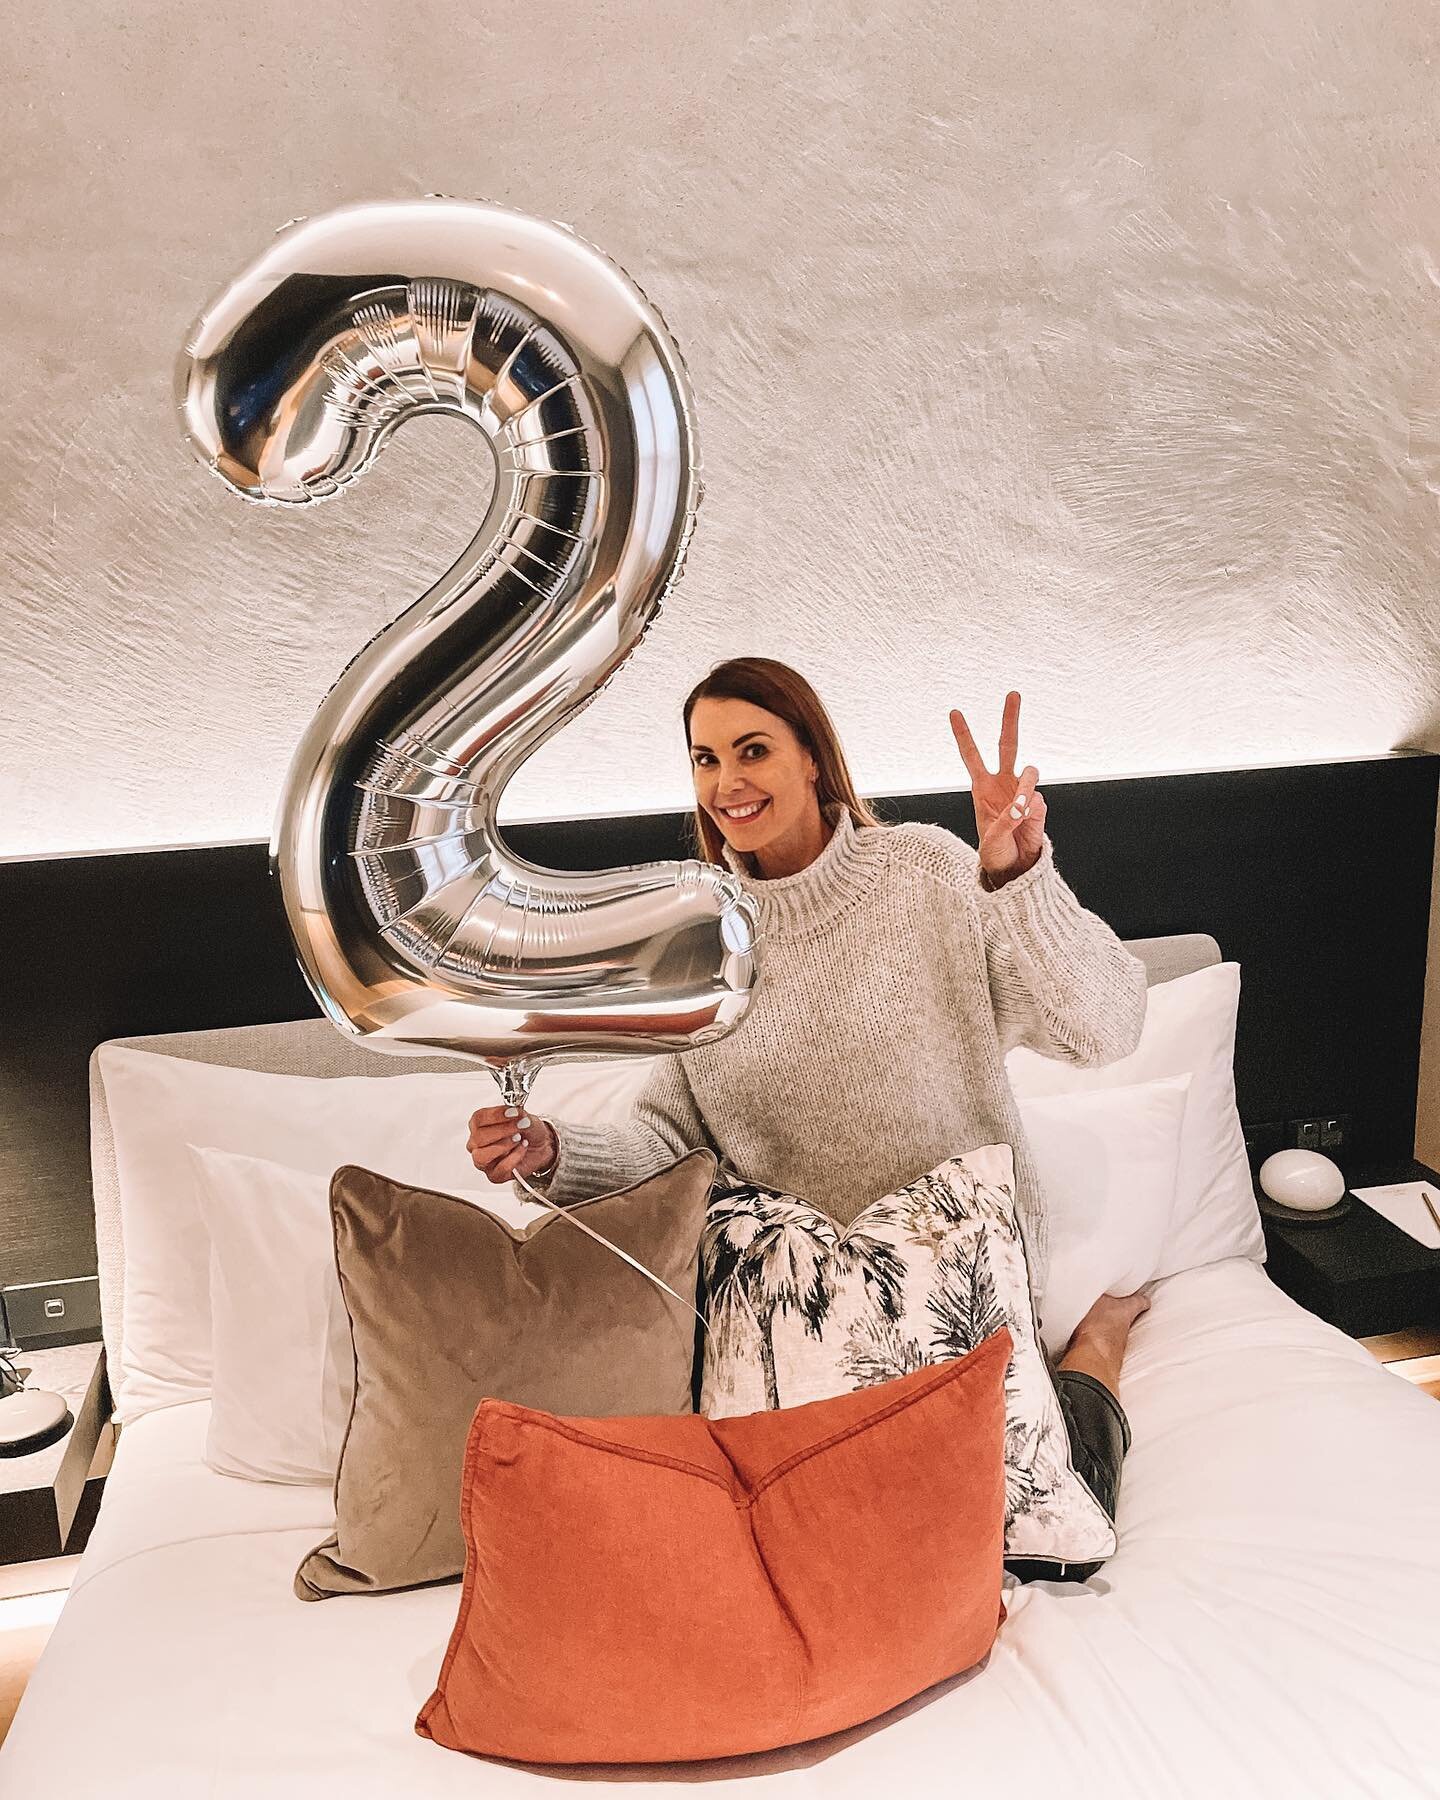 RUN DON&rsquo;T WALK! My favourite boutique hotel chain is turning two and to celebrate I&rsquo;m giving away one night&rsquo;s stay at any Fable property across New Zealand. I&rsquo;ve just spent a night at my new favourite in Auckland&rsquo;s Ponso